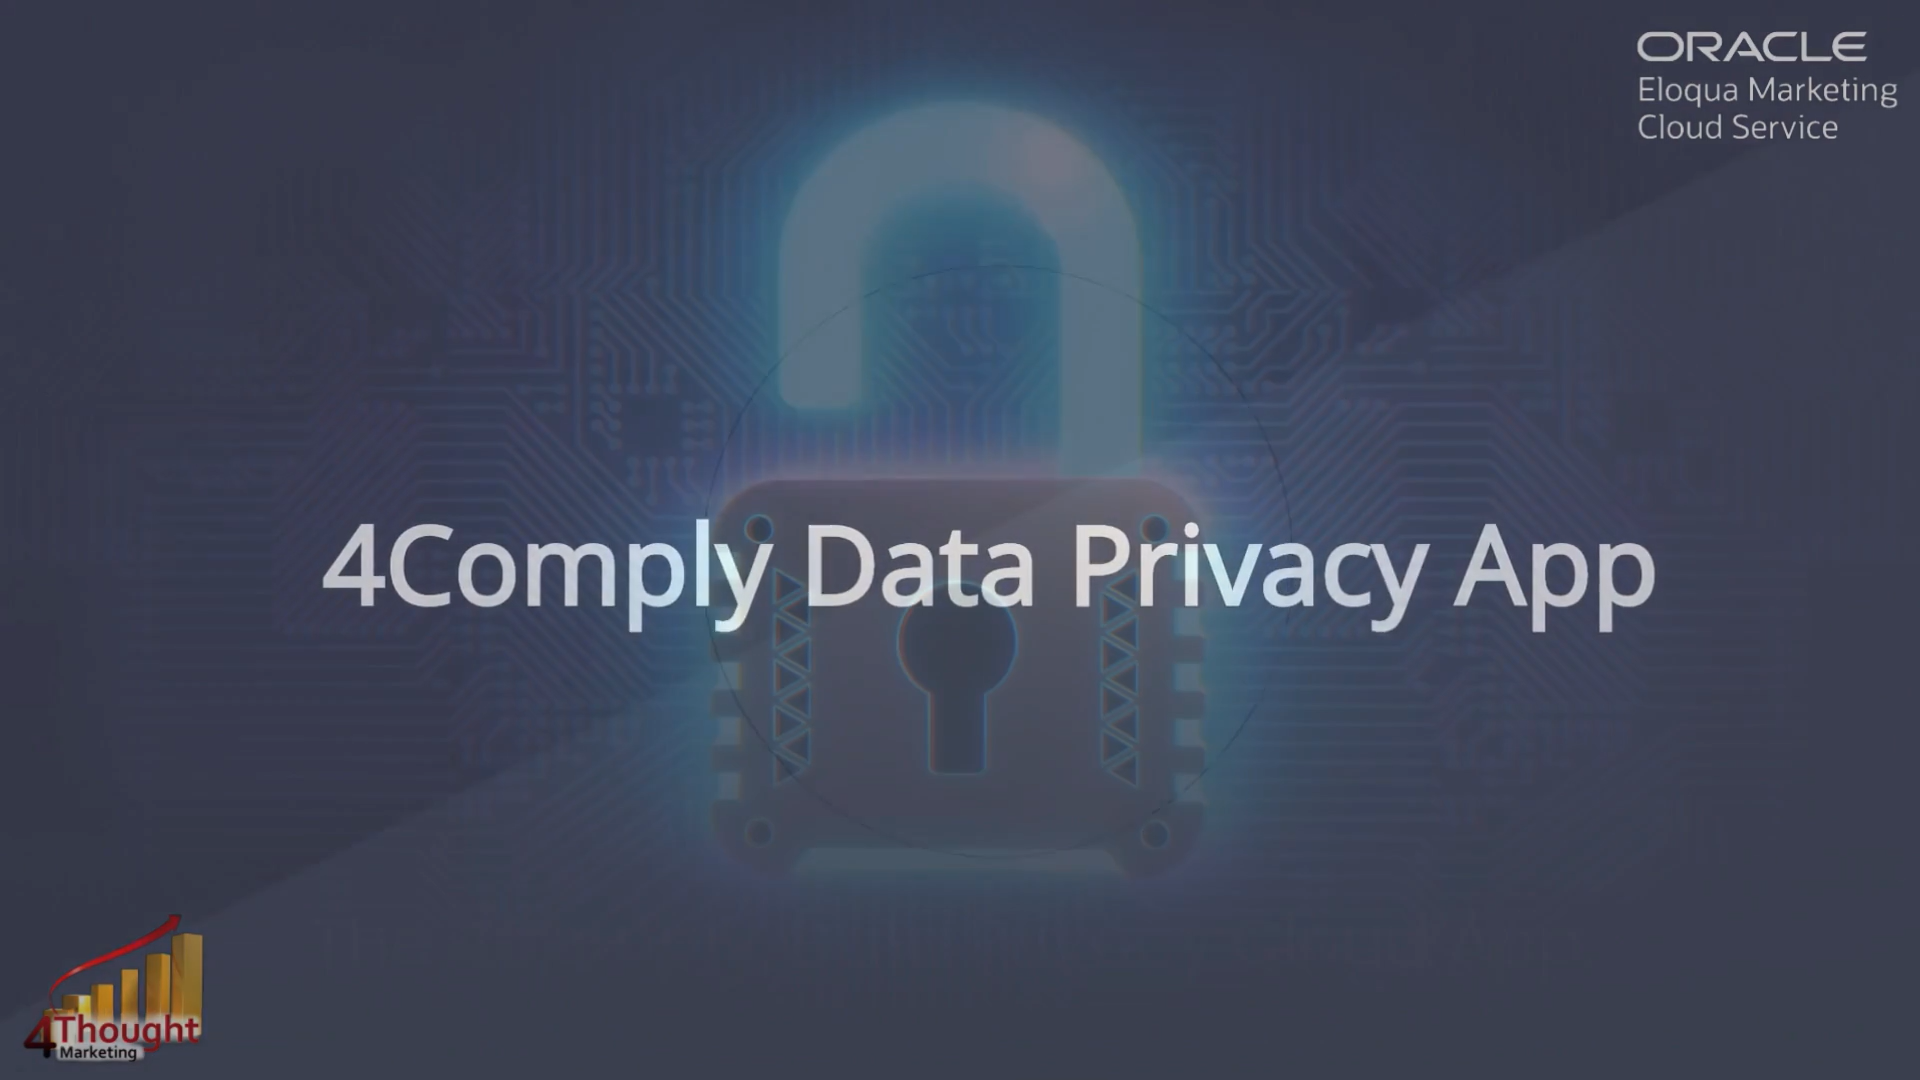 Comply Data Privacy App Long Title Thumbnail